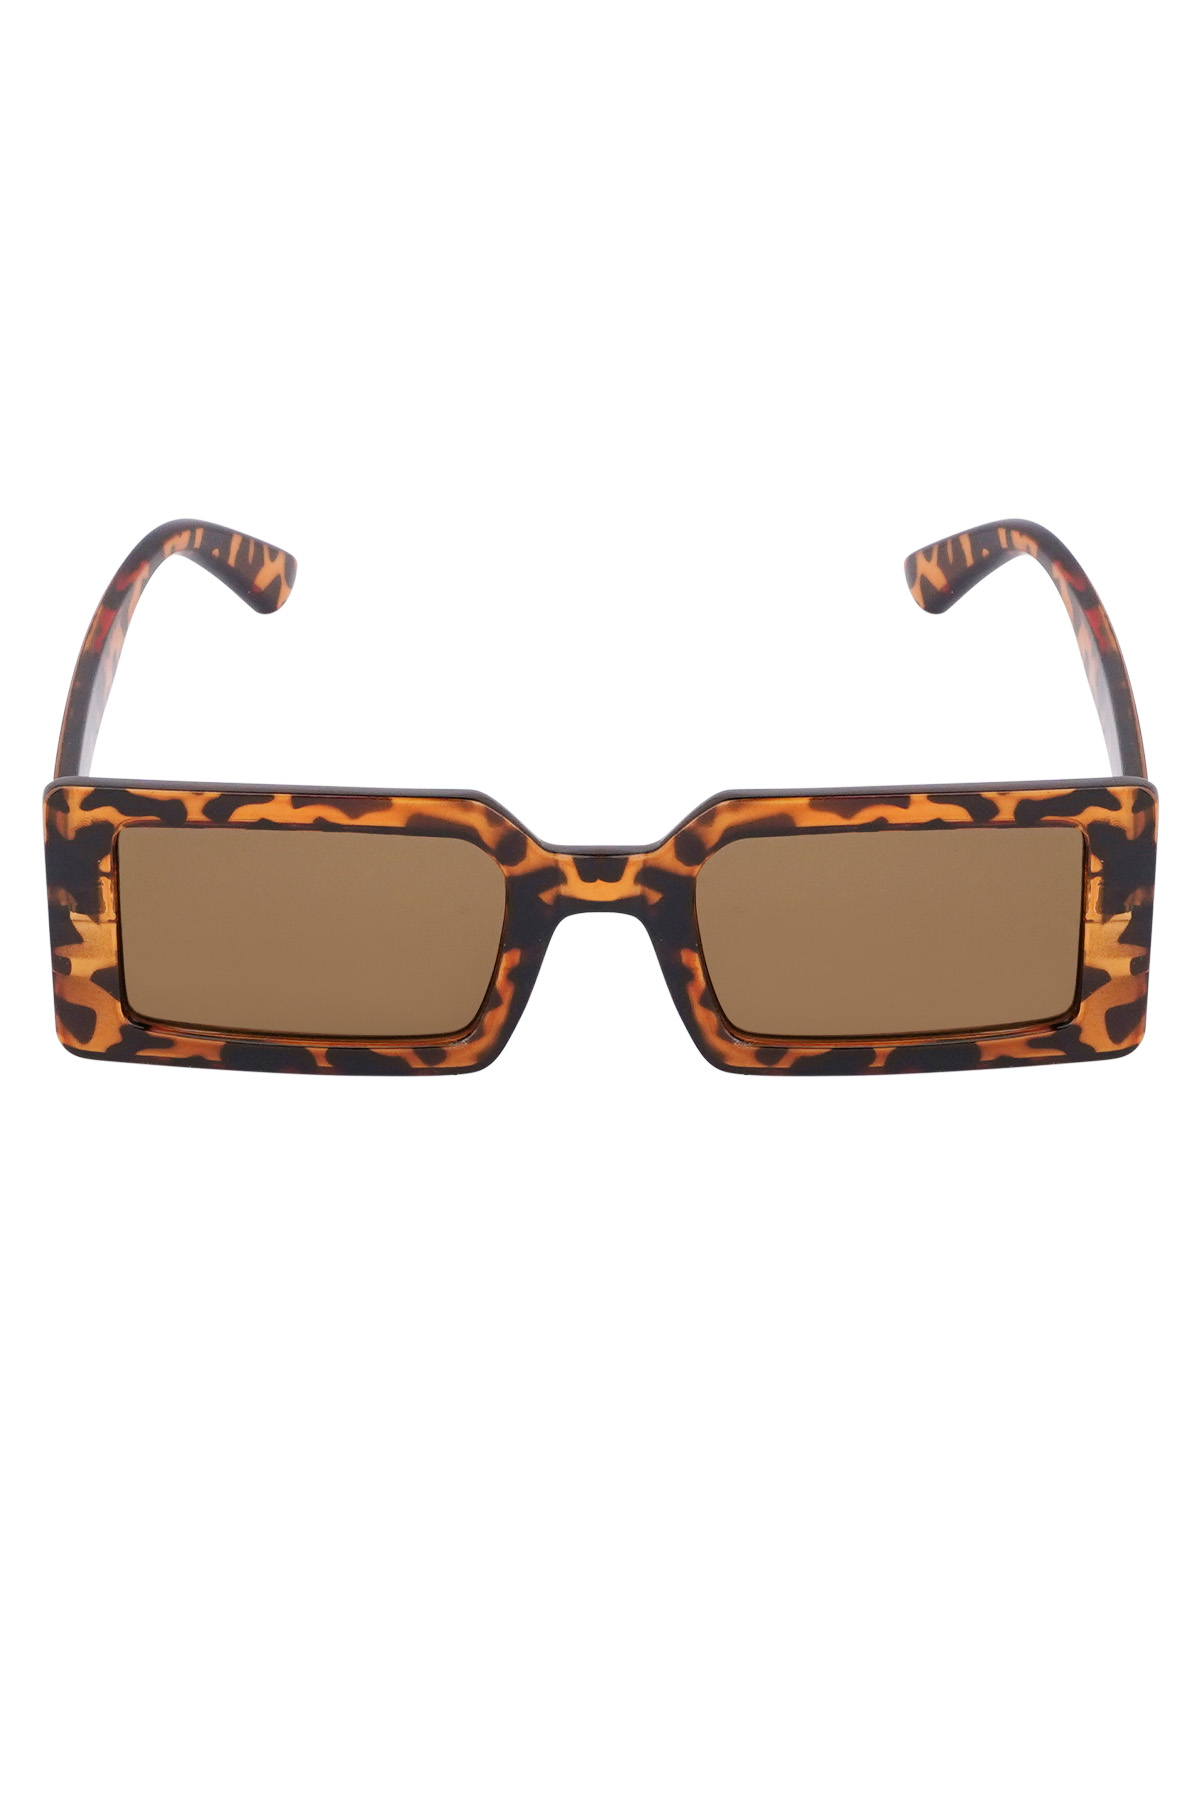 Shimmerglow sunglasses - brown Picture4